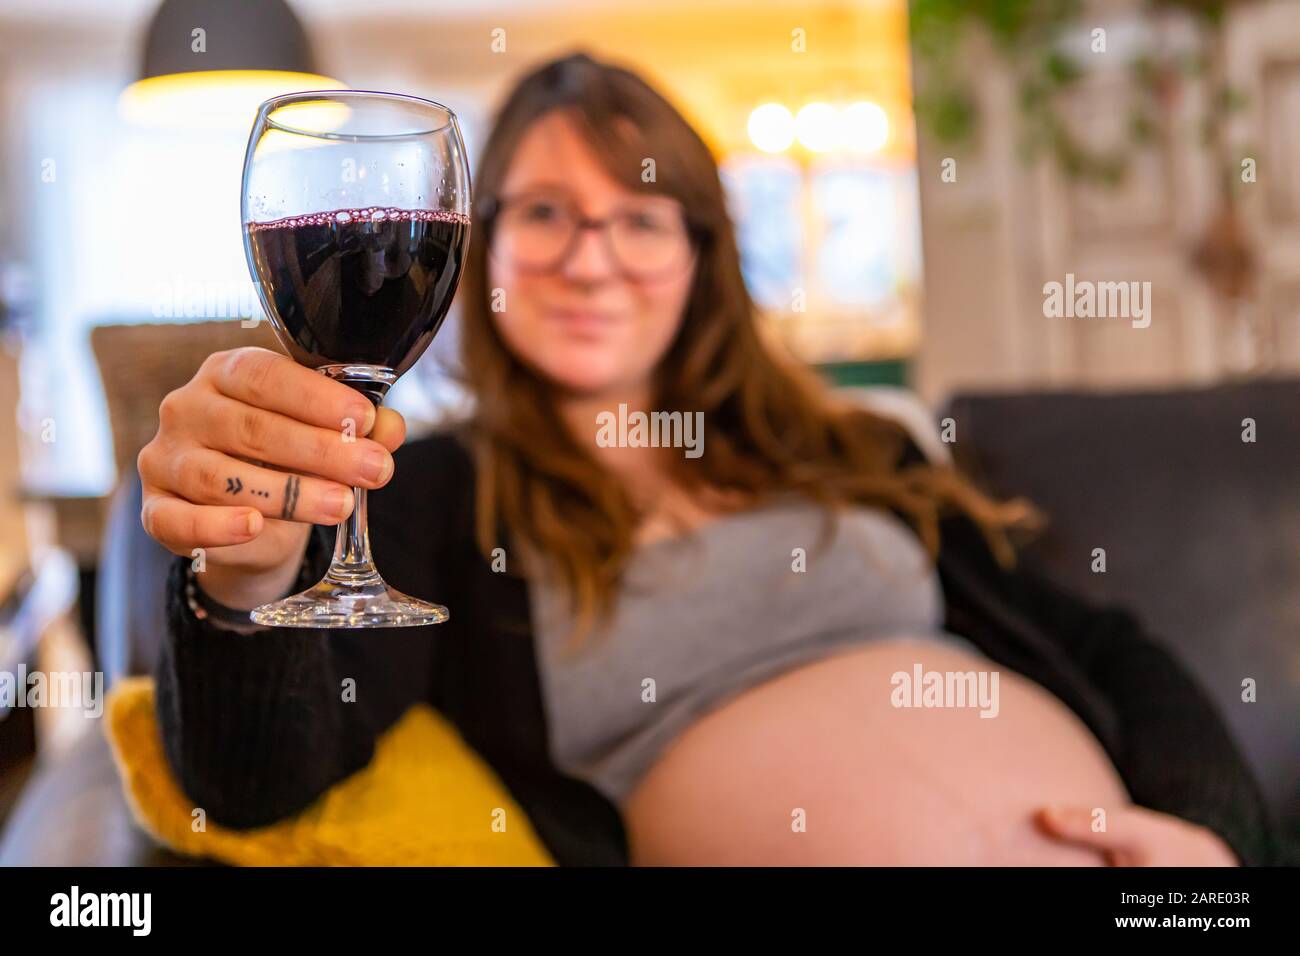 A selective focus view of a pregnant woman in third trimester enjoying a glass of red wine at home, risking health of unborn baby, copy space to right Stock Photo